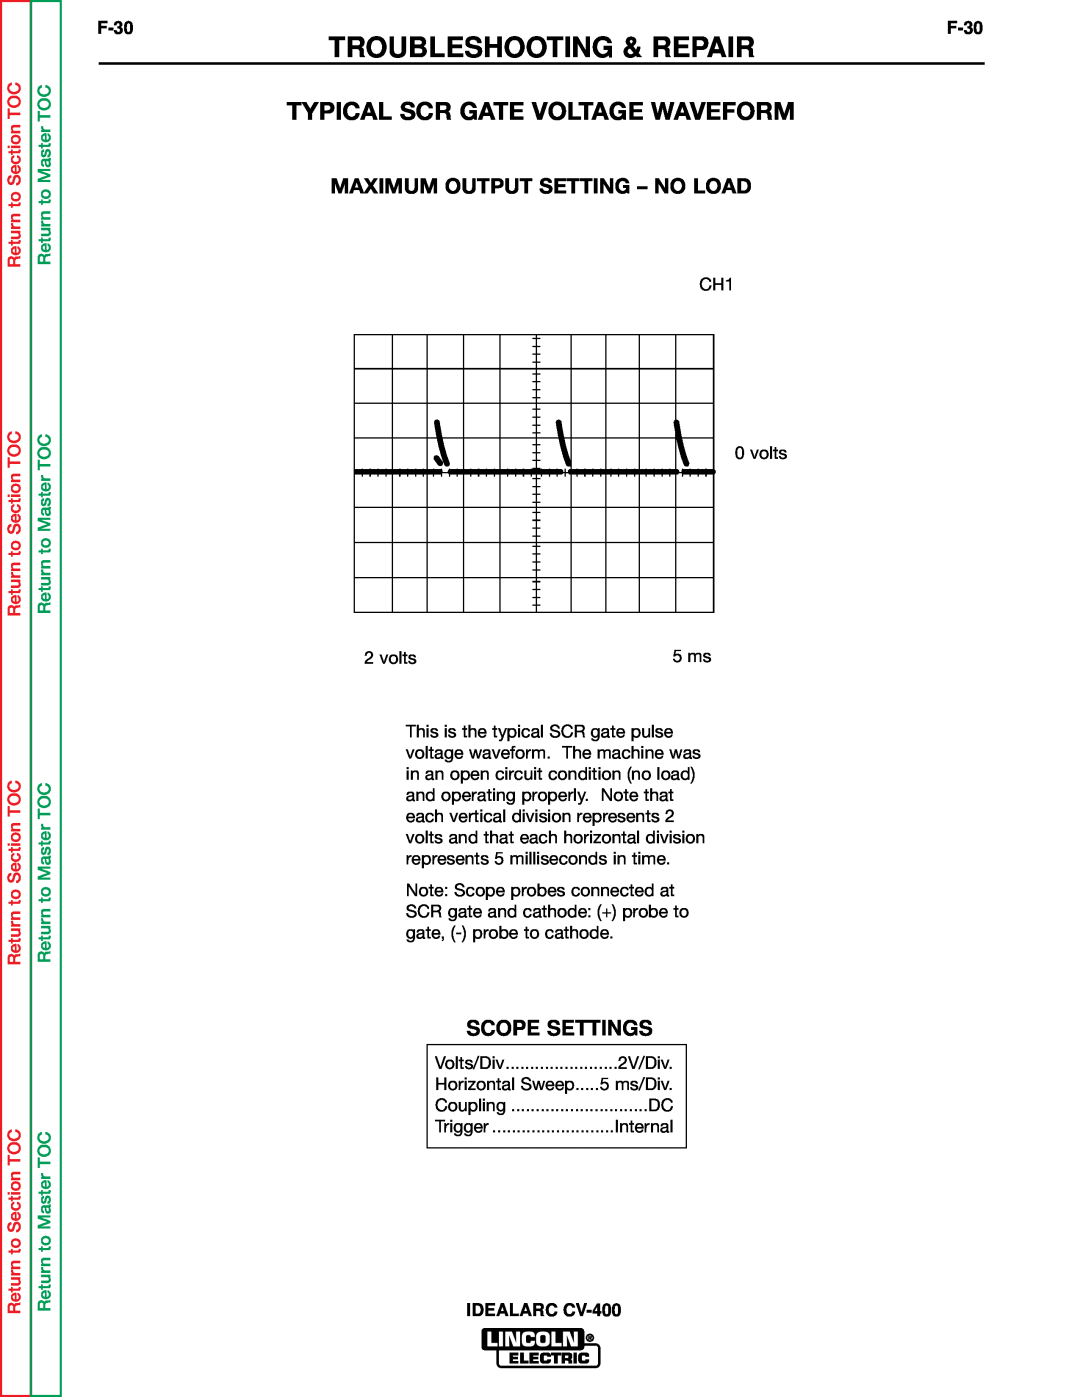 Lincoln Electric SVM136-A service manual Typical Scr Gate Voltage Waveform, Troubleshooting & Repair, Scope Settings 